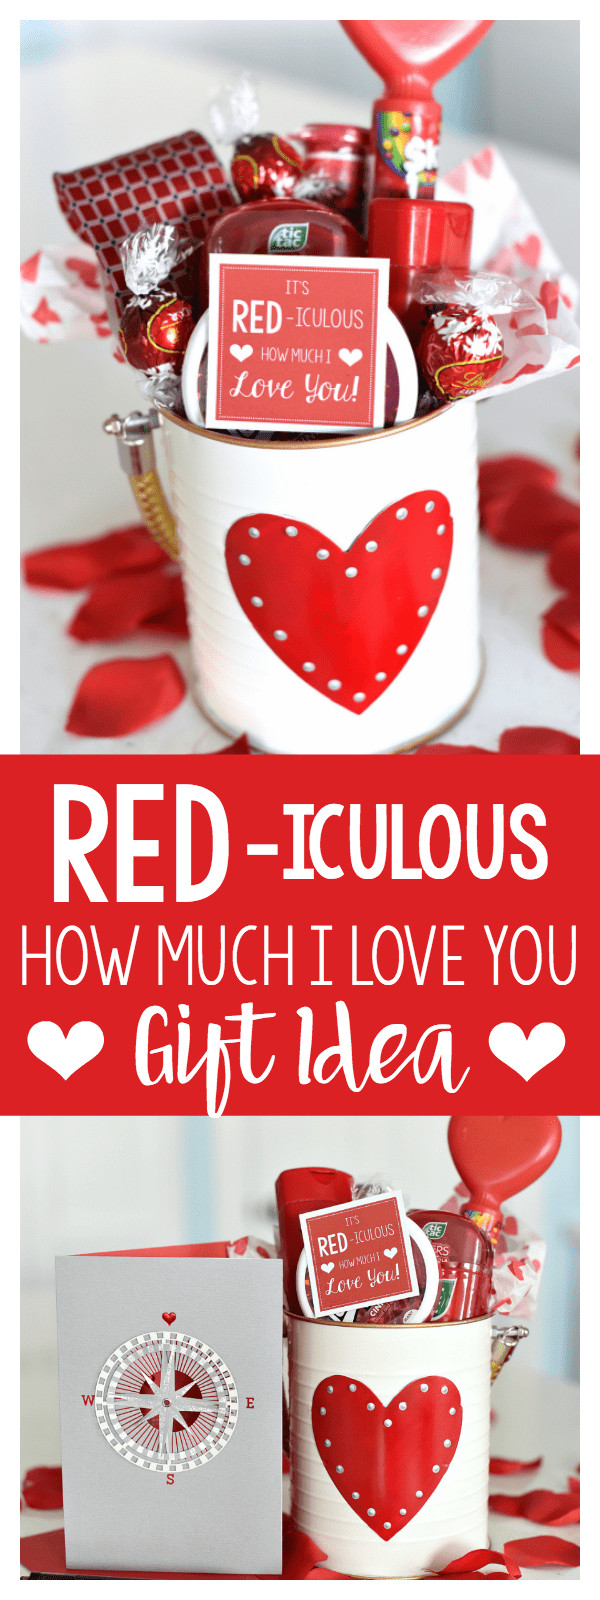 Fun Valentines Day Gifts
 Cute Valentine s Day Gift Idea RED iculous Basket